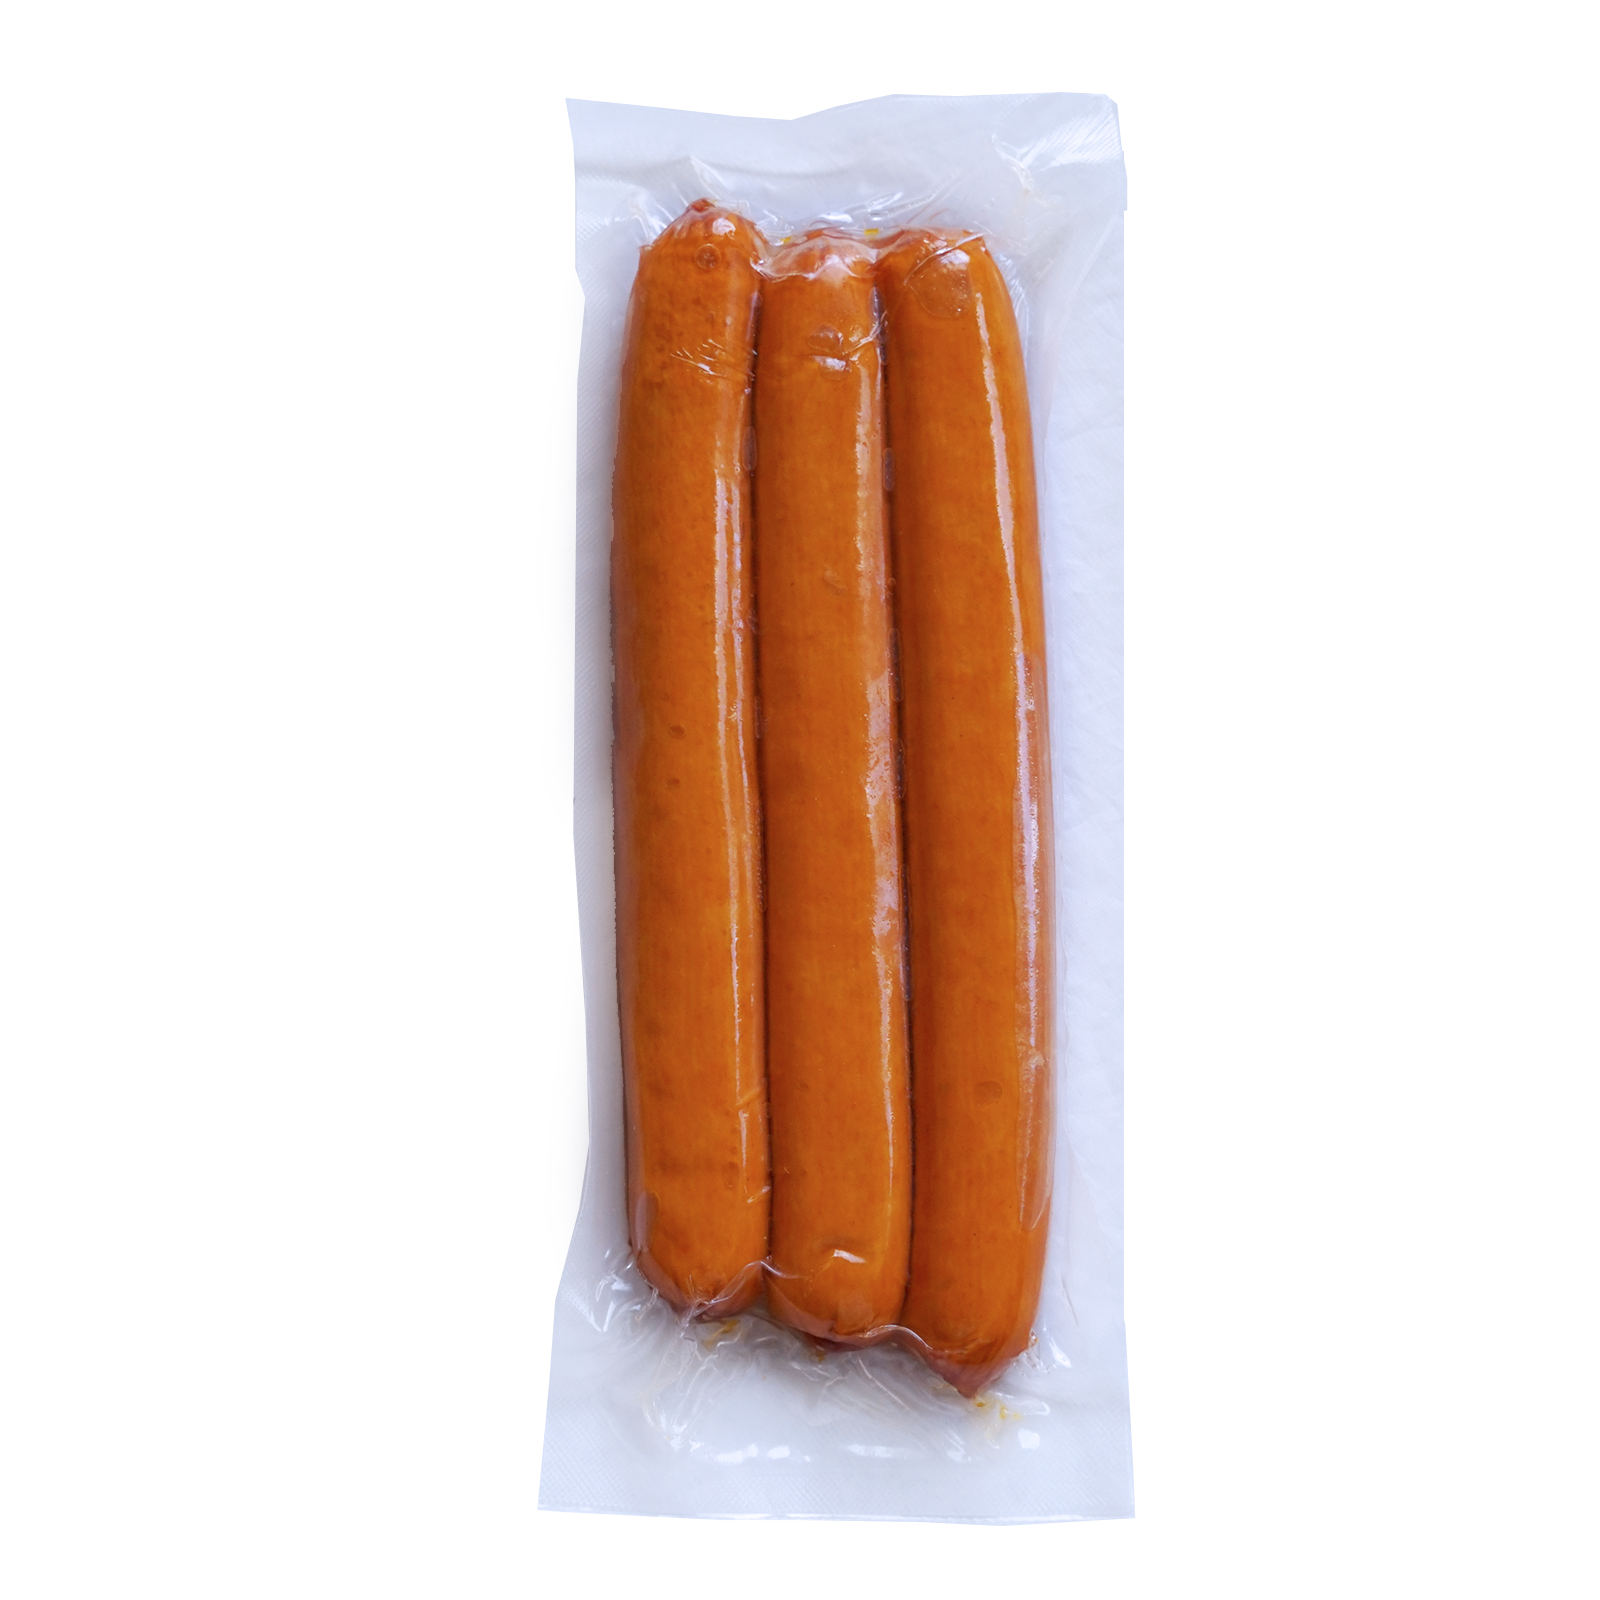 All-Natural Free-Range Pork Cooked Hot Dog Sausages from The Netherlands (6pc) - Horizon Farms